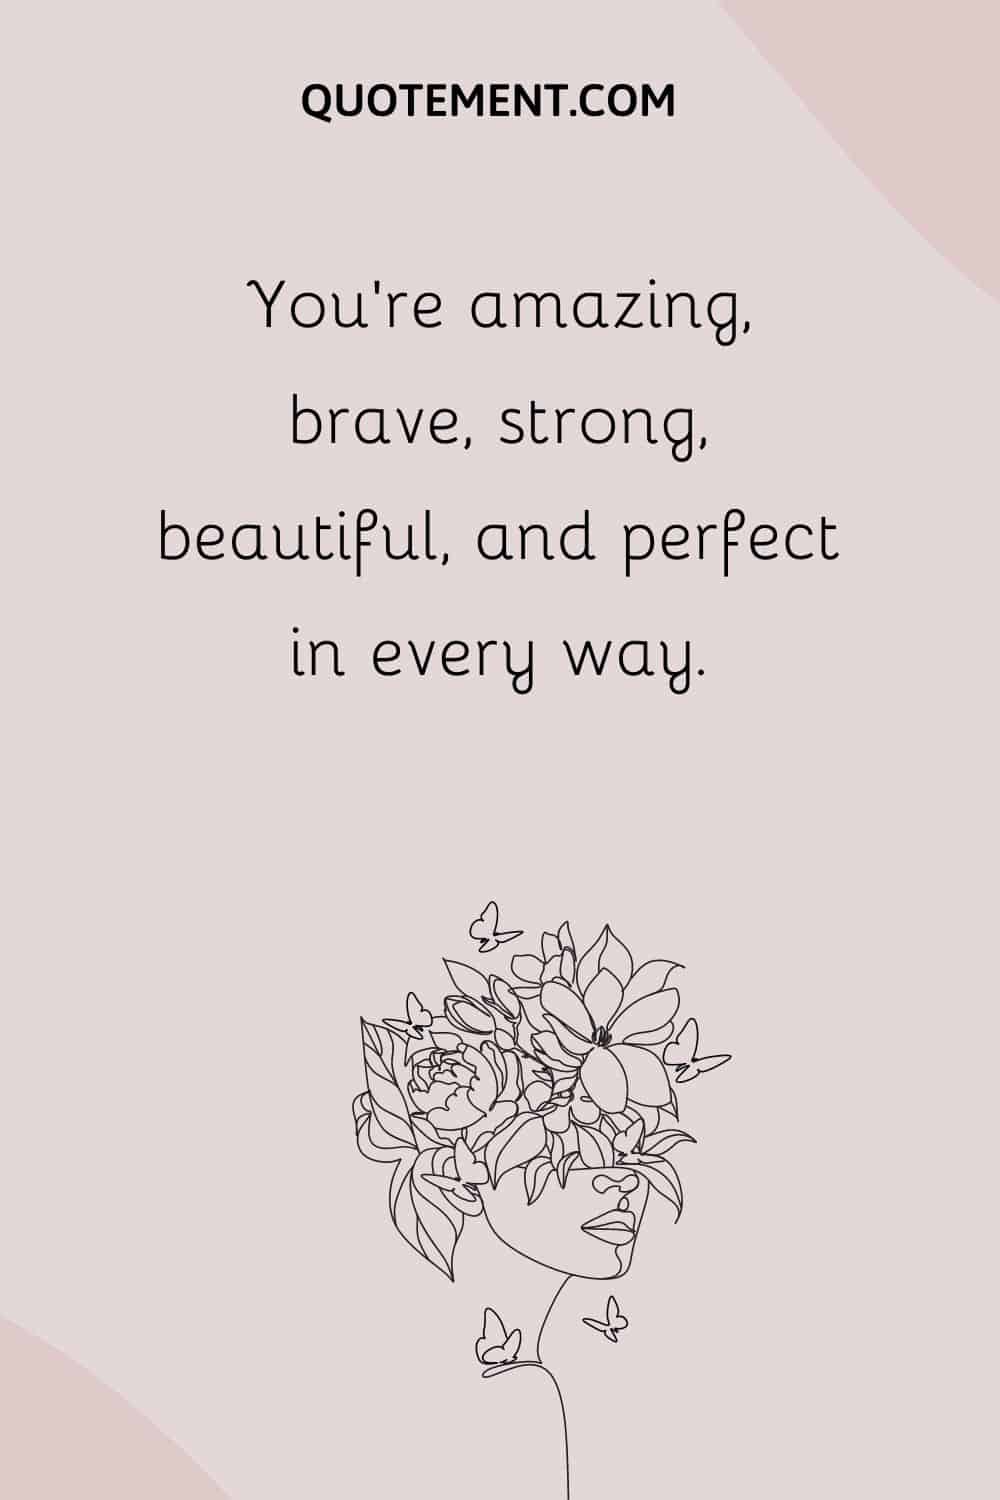 You’re amazing, brave, strong, beautiful, and perfect in every way.